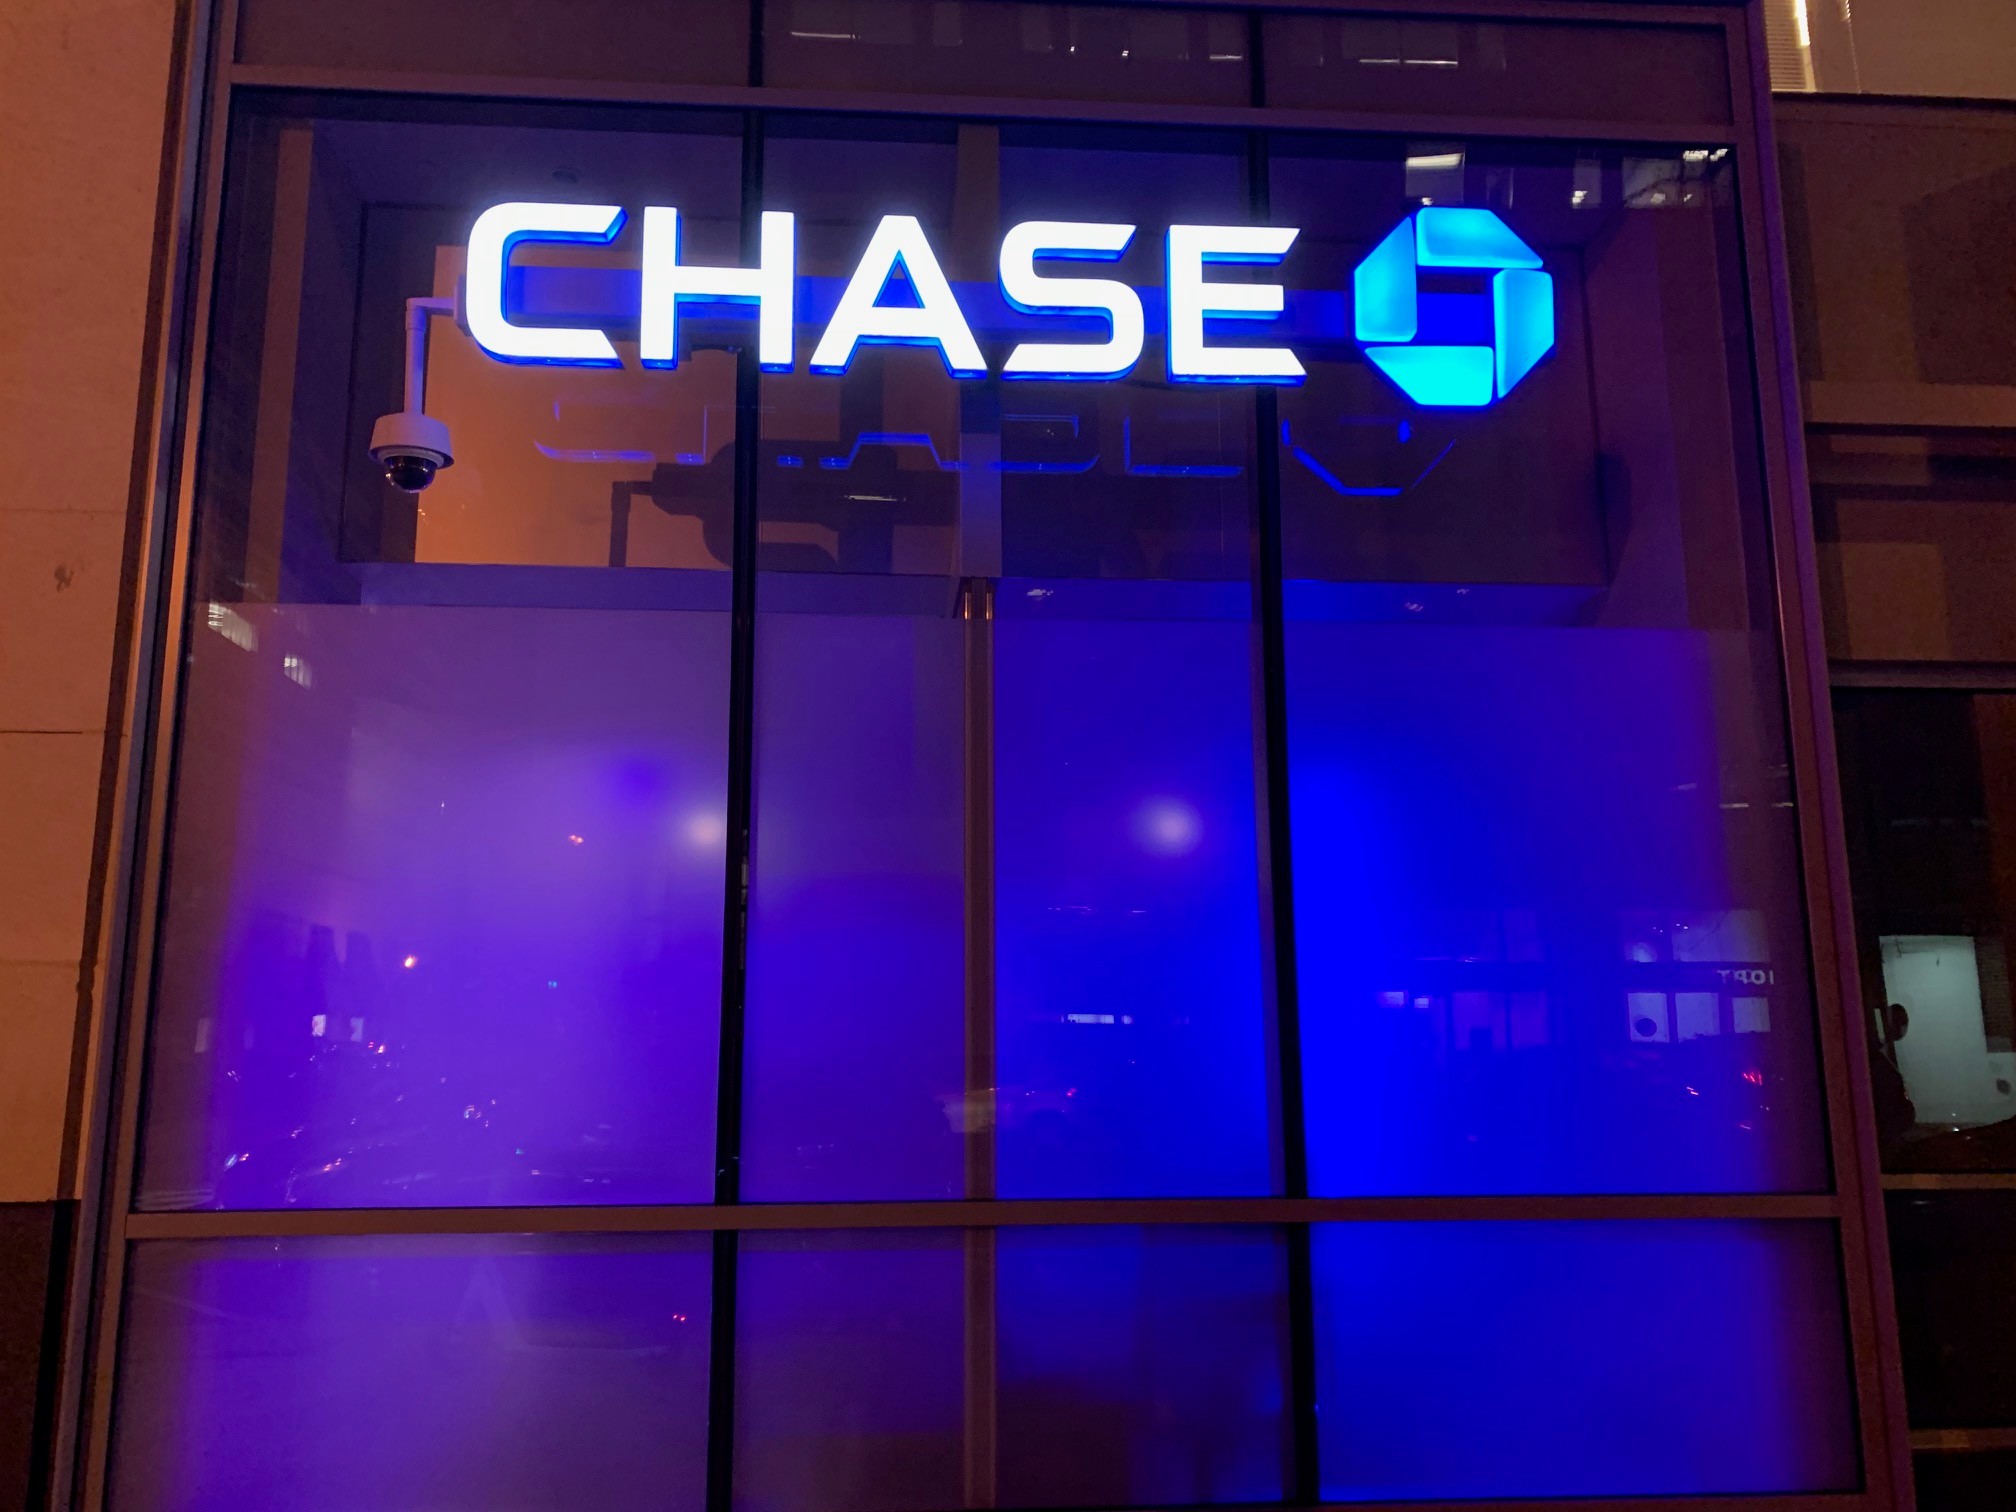 New Bonuses for Chase IHG Credit Cards